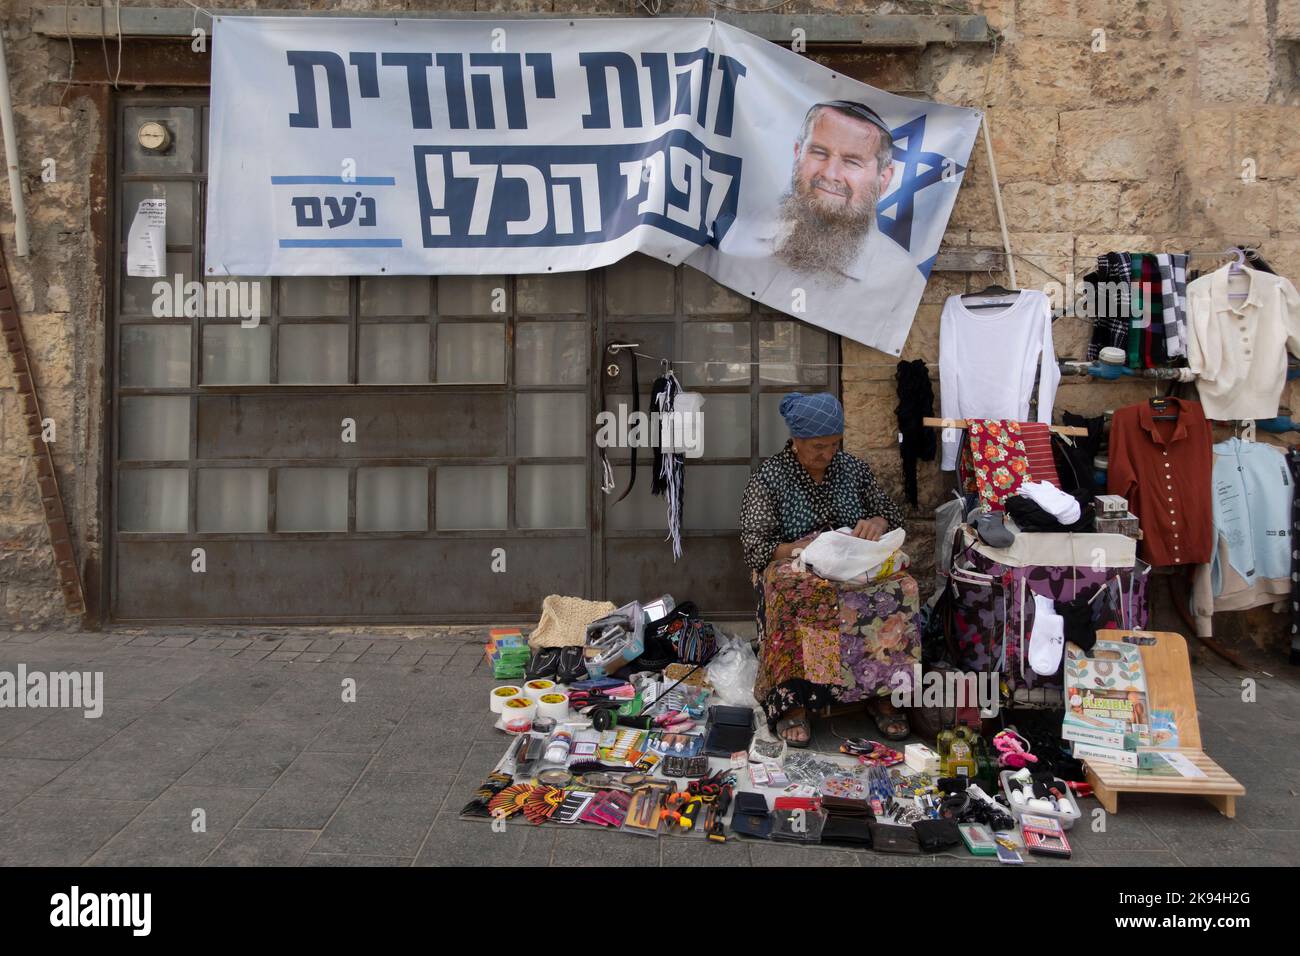 An Israeli street vendor sits beneath an election campaign poster for the  far-right Orthodox Jewish political party Noam depicting its leader Avi Maoz with a a caption reading  'Jewish identity above all'  is displayed in Jaffa road on October 25, 2022 in Jerusalem, Israel. Public opinion polls show significant support for the Religious Zionism party running together with the far-right Jewish Power ahead of parliamentary elections set for November 1 Stock Photo